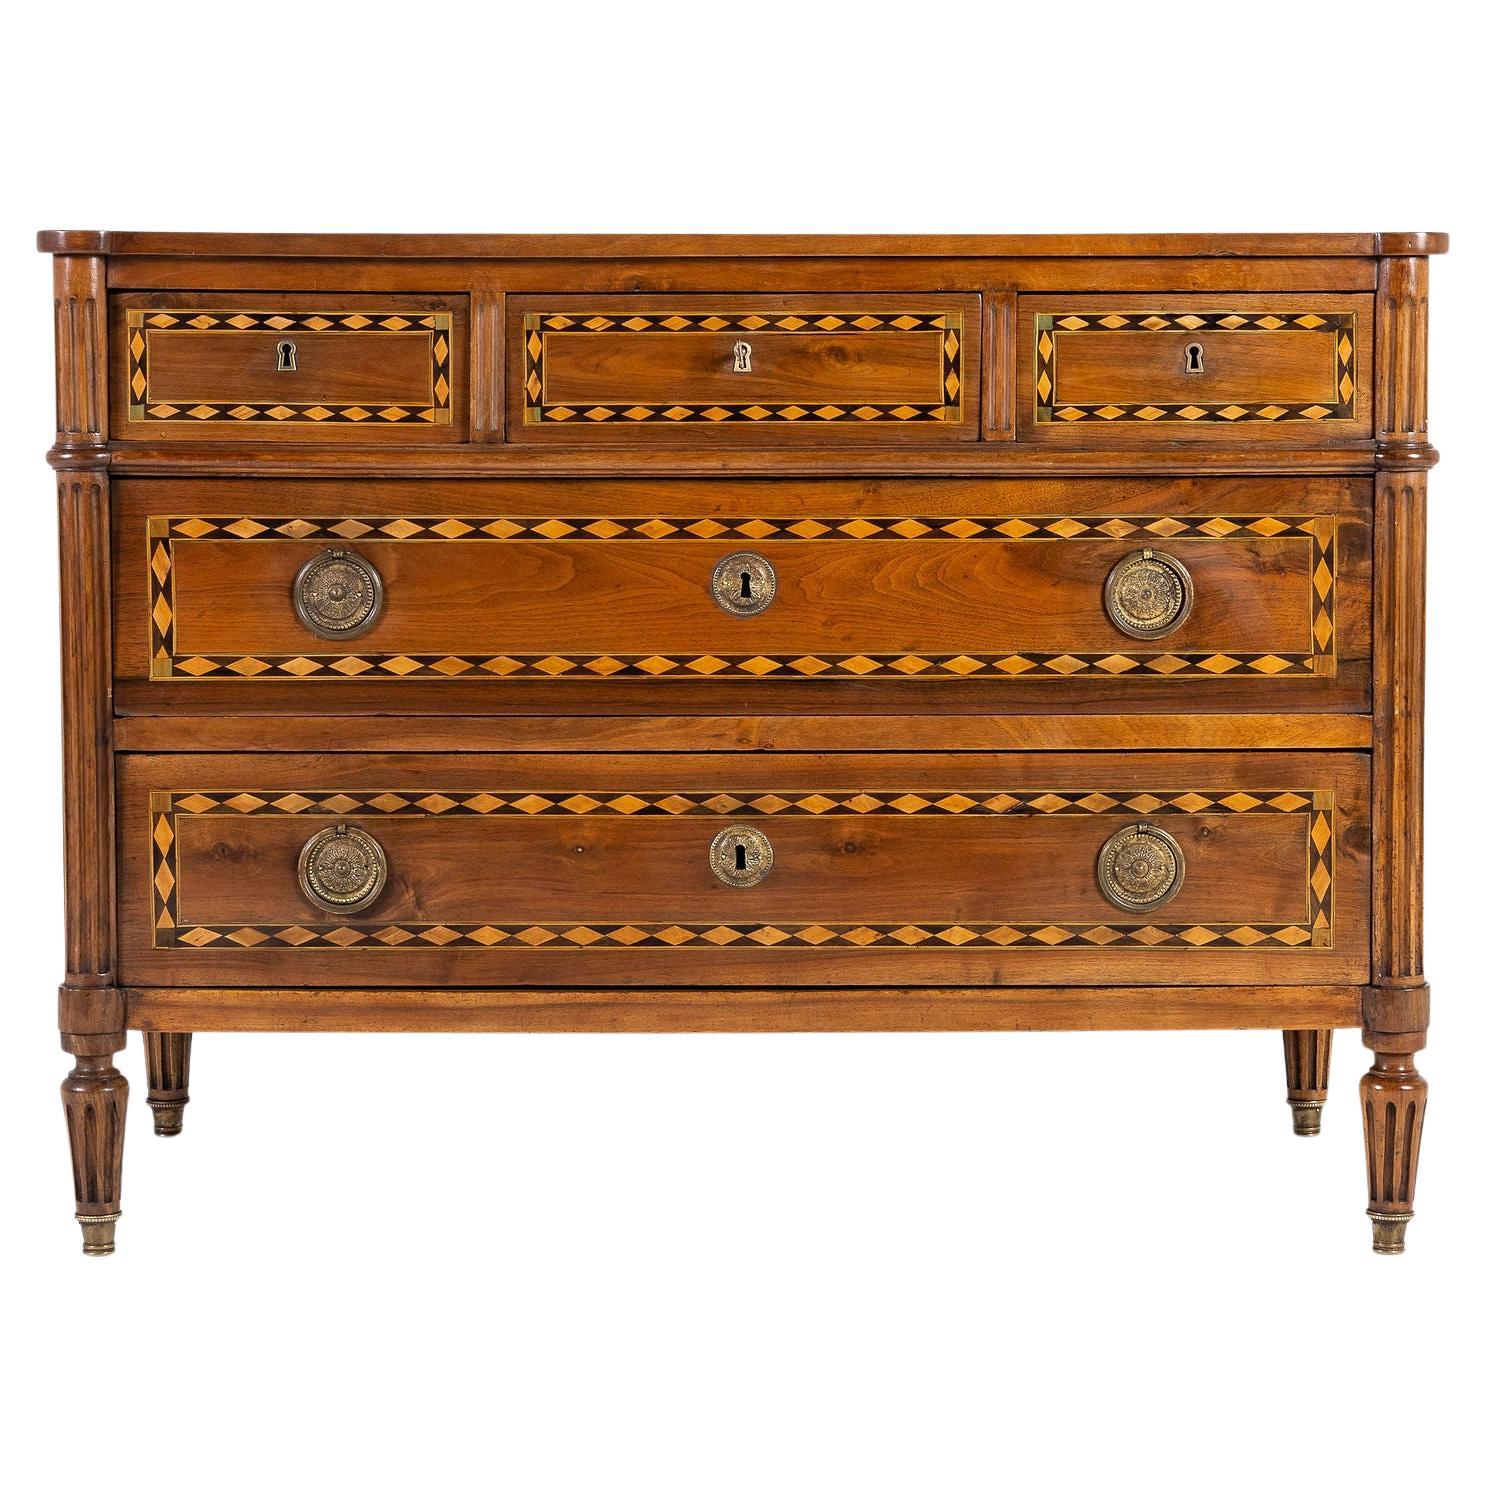 Late 18th Century French Inlaid Walnut Commode